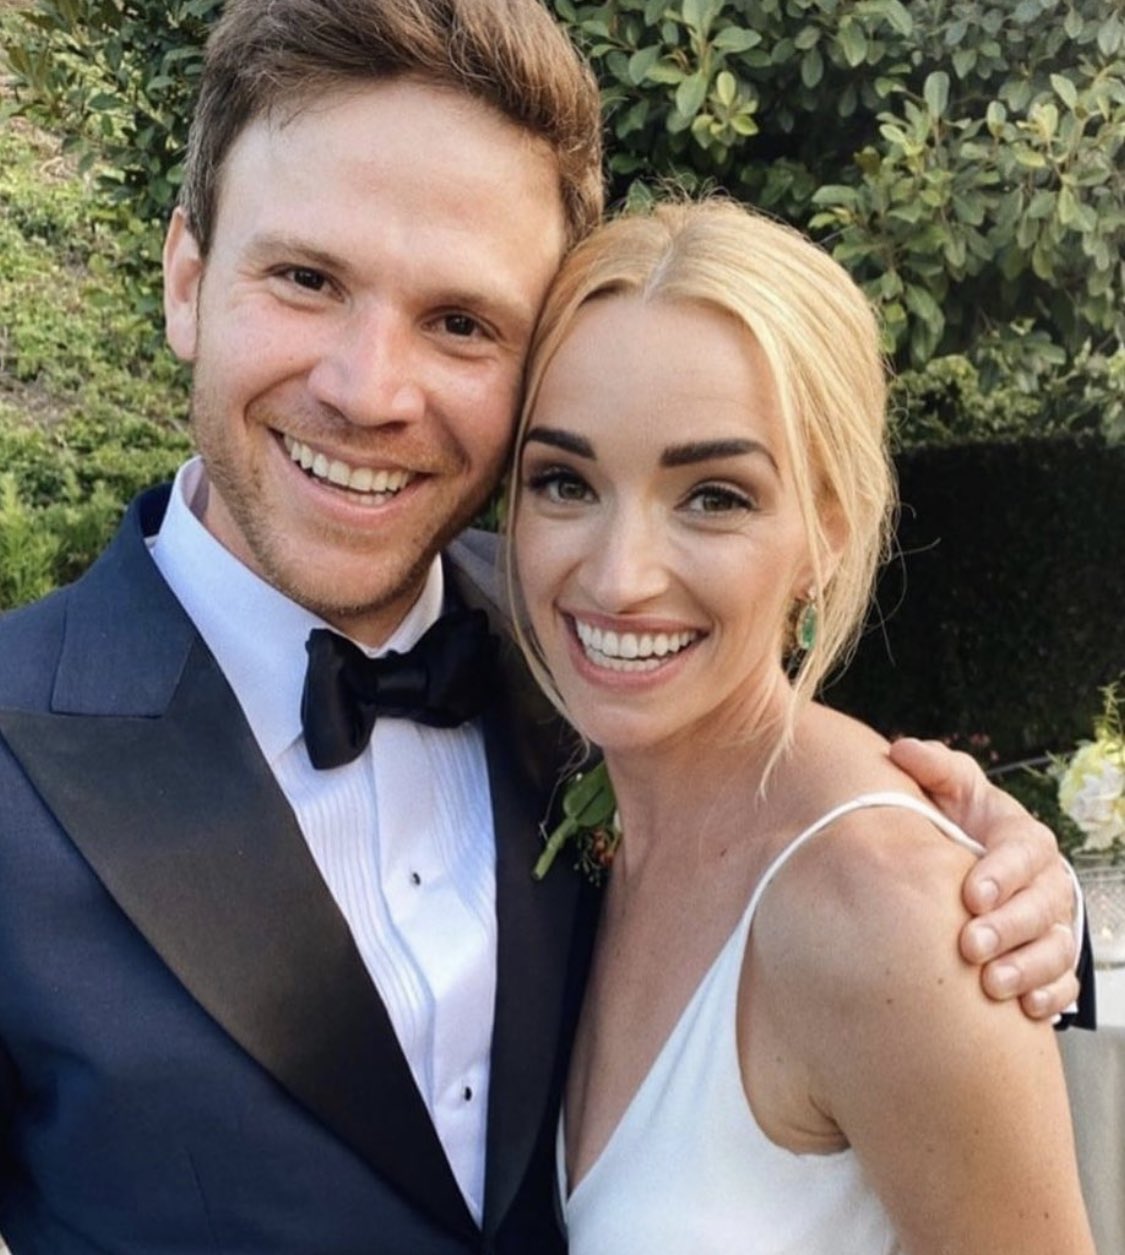 Brianne Howey tied the knot with her husband, Matt Ziering, in 2021.